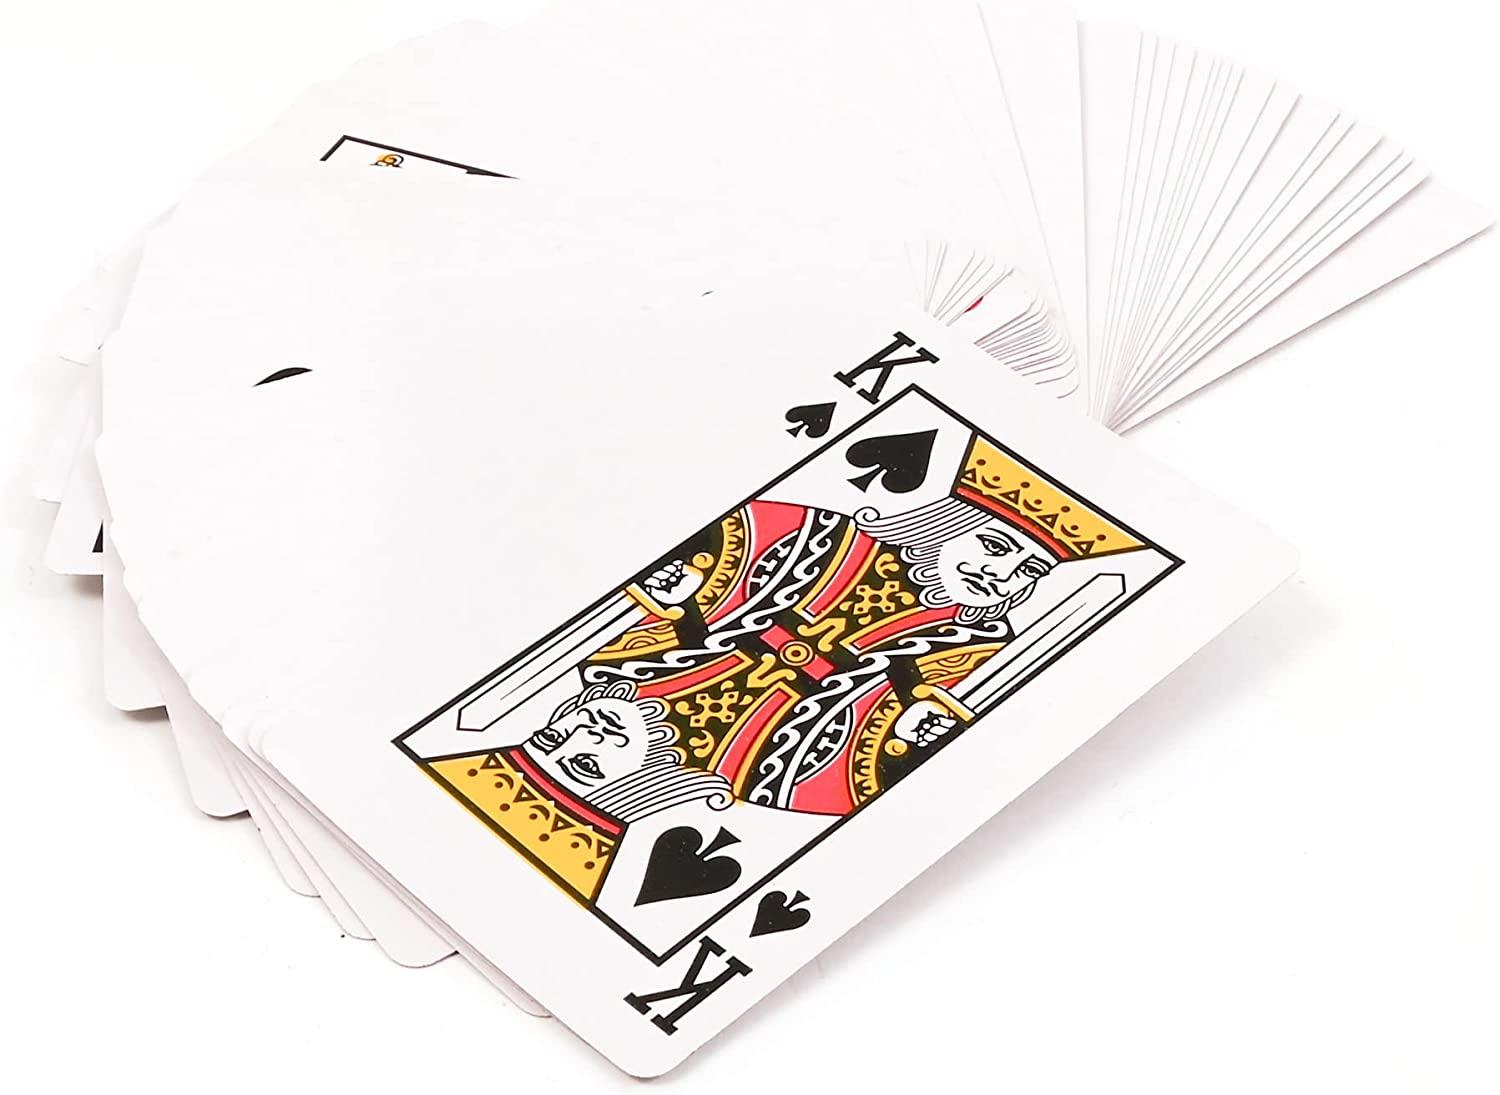 The Magic Toy Shop Playing Cards Deck of Classic Playing Cards